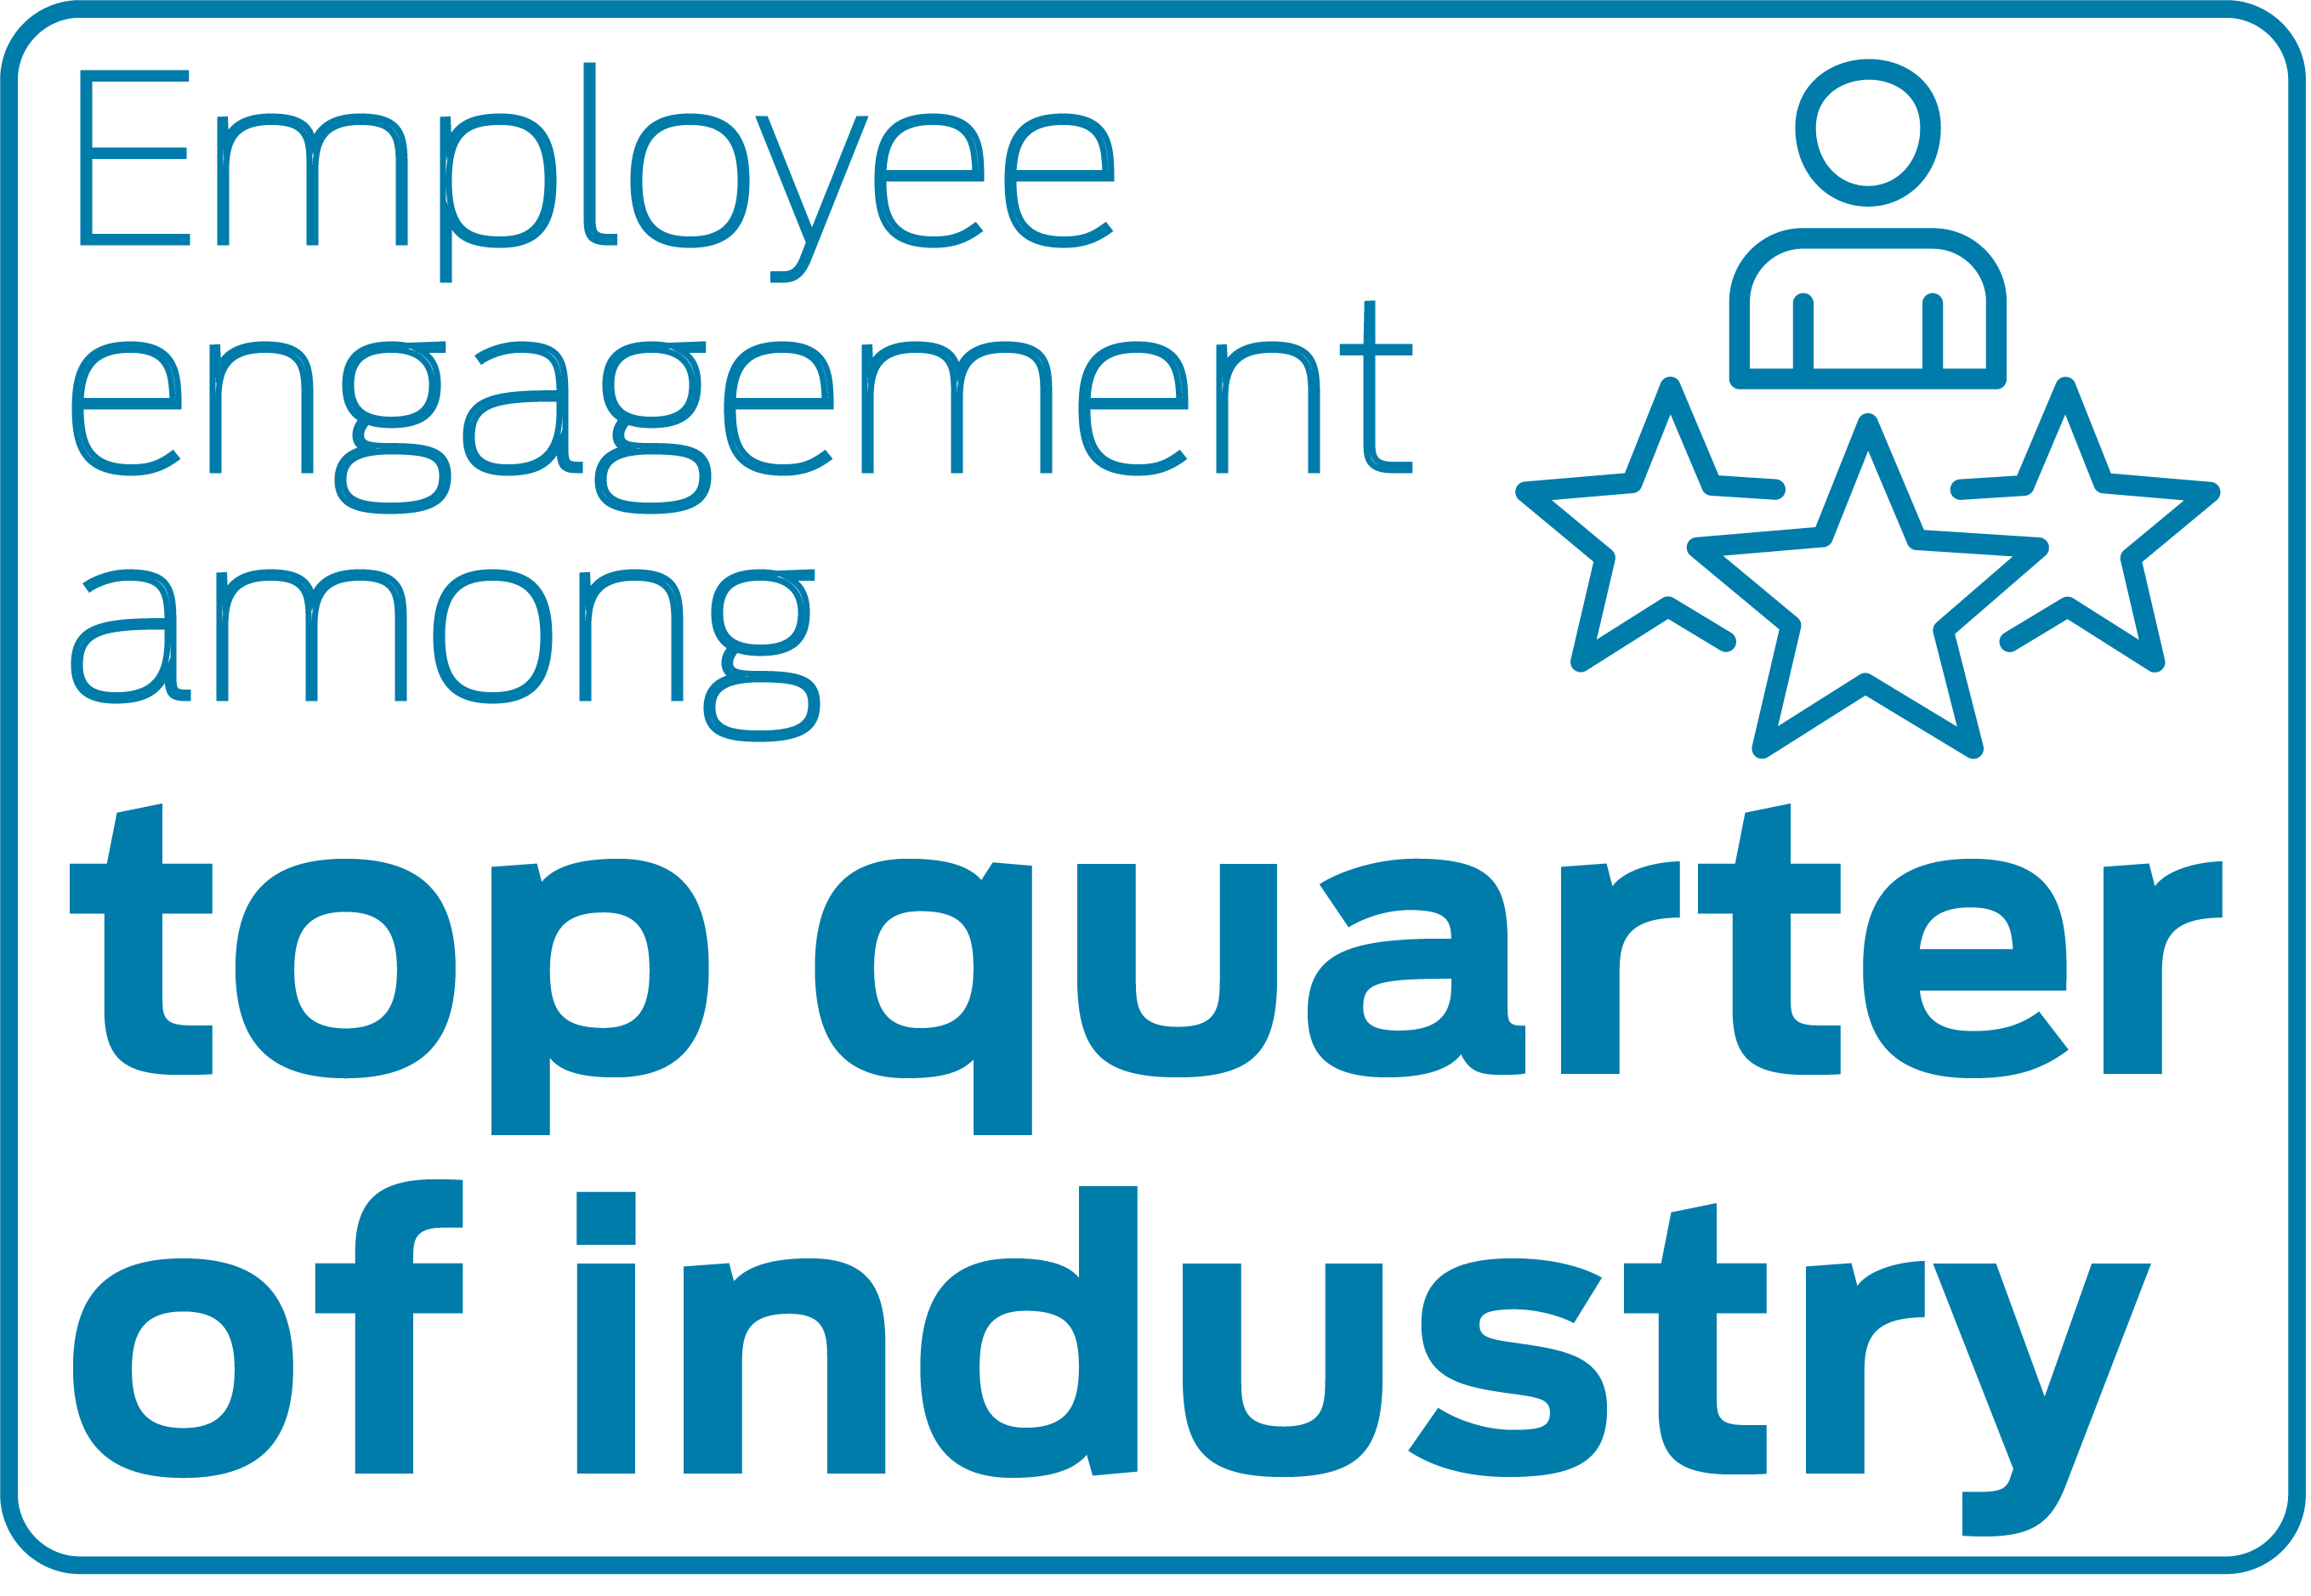 Employee engagement among top quarter of industry